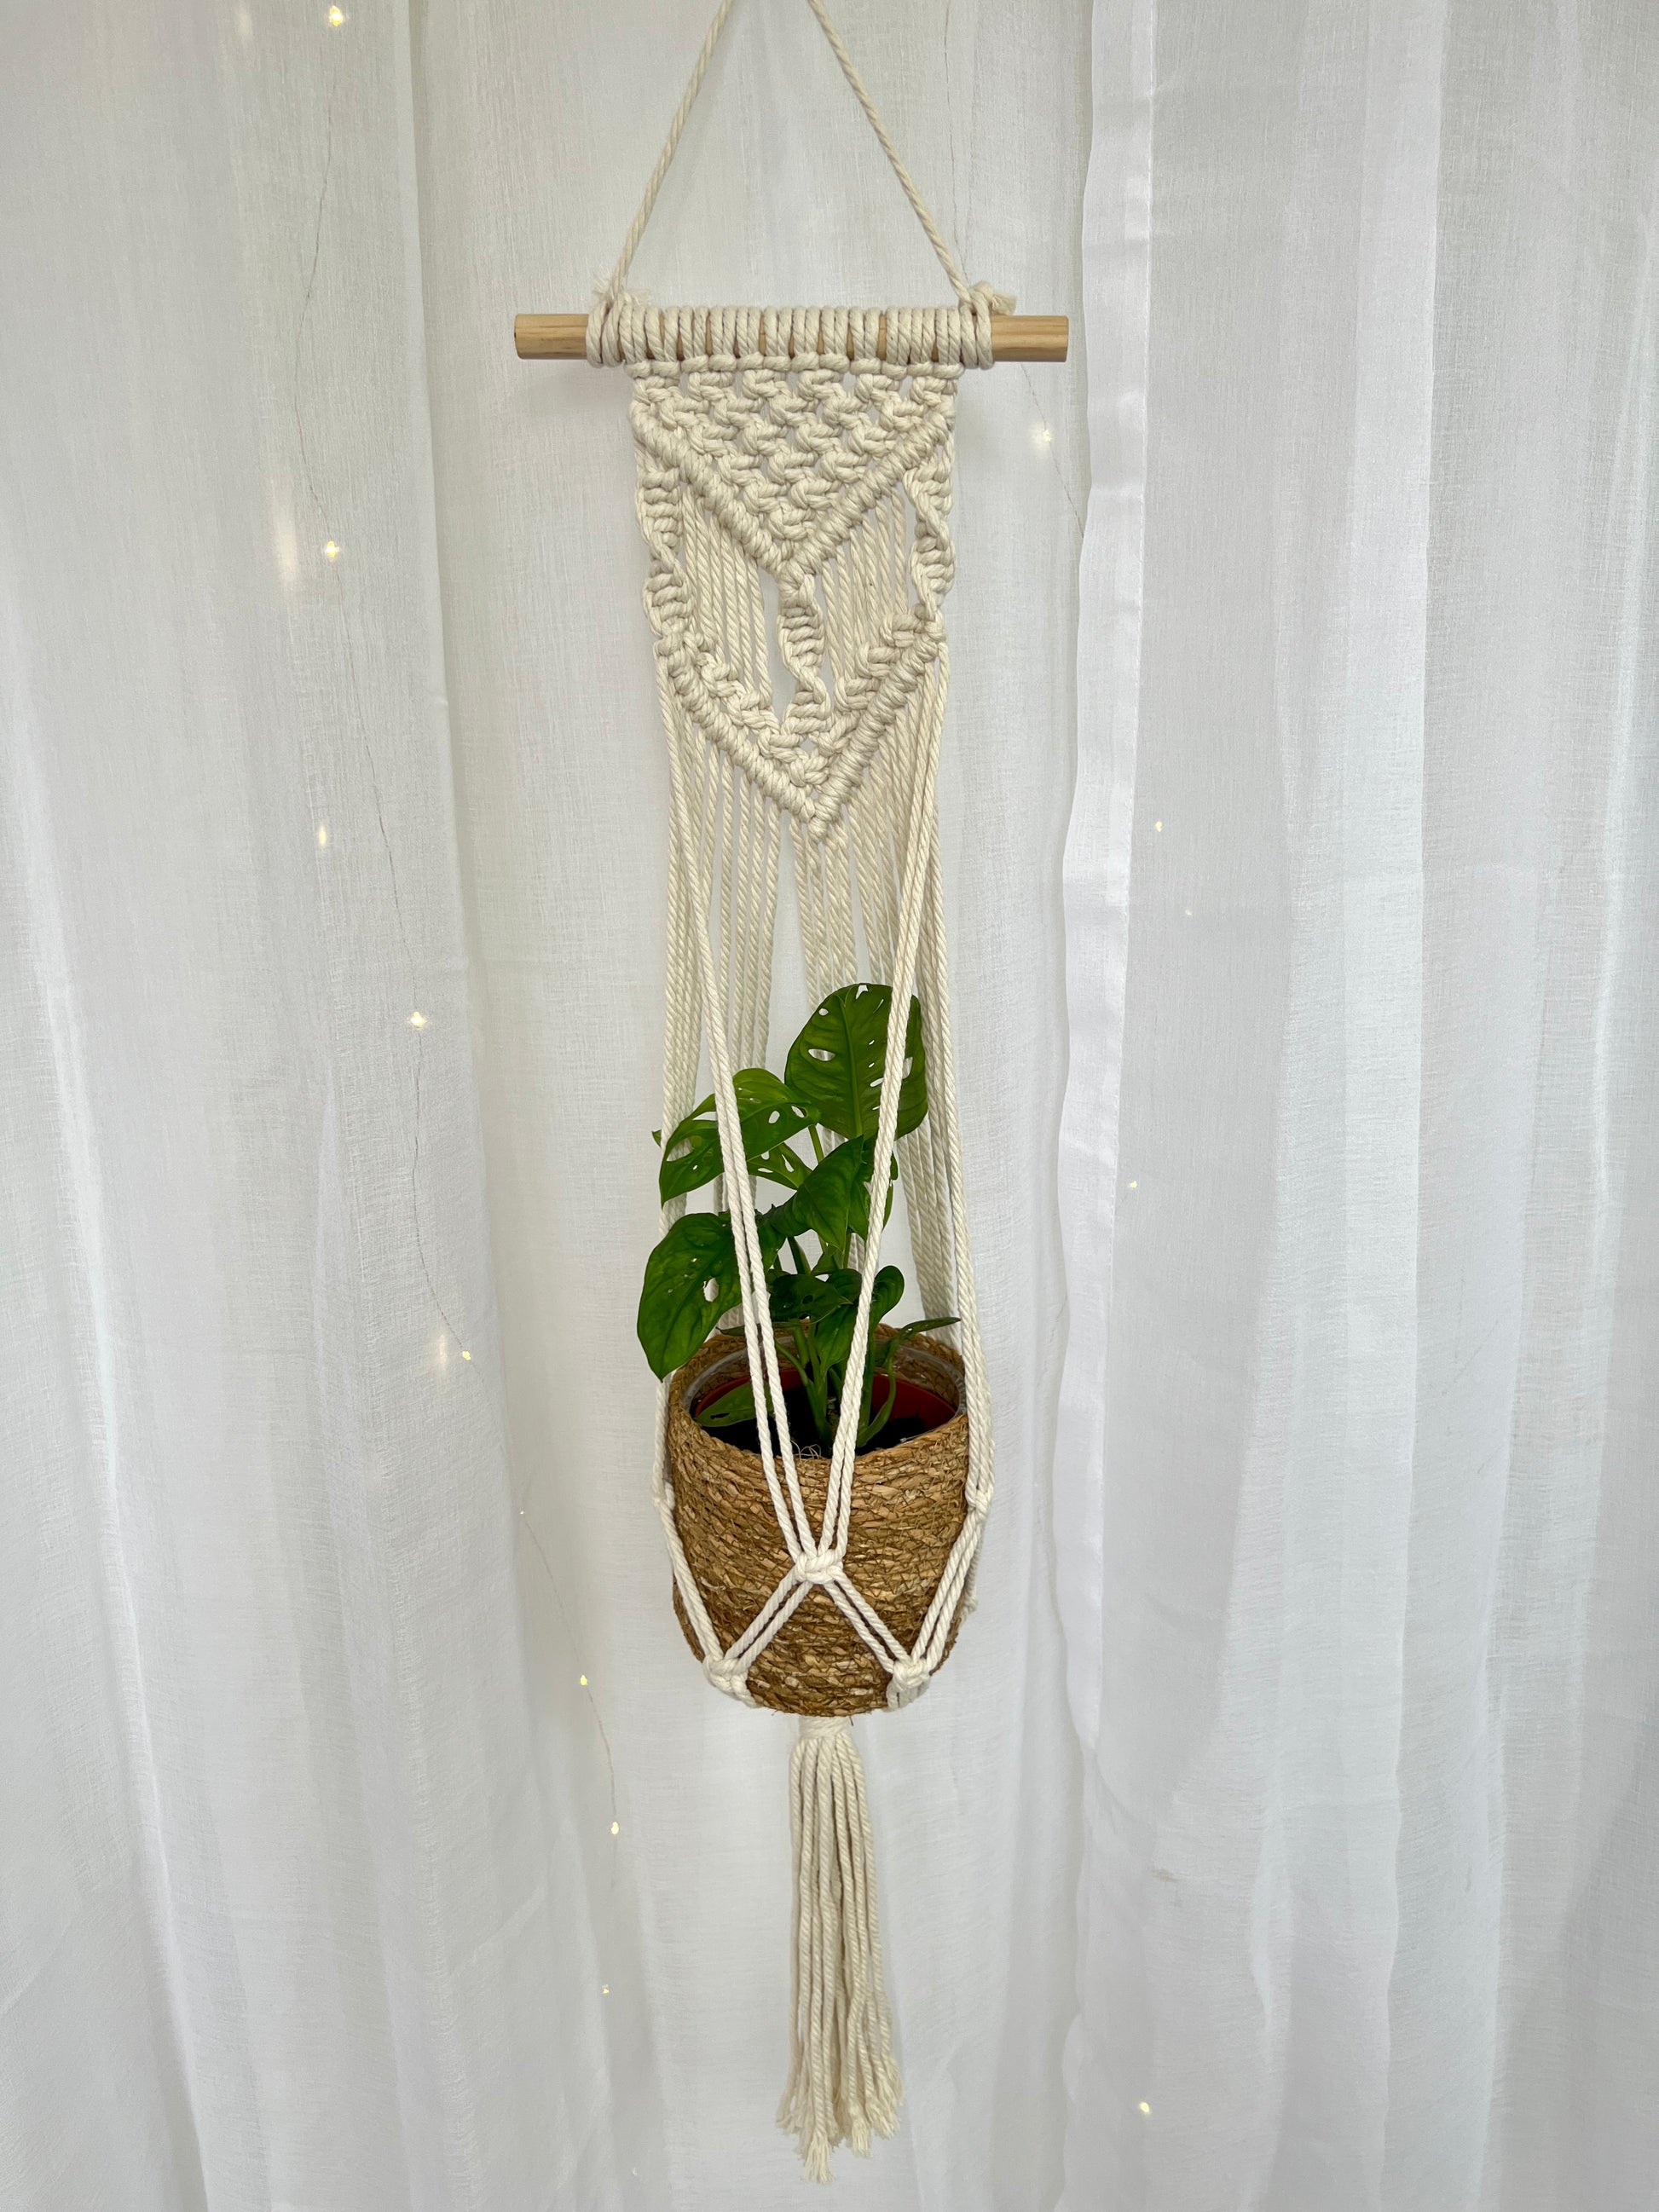 Monstera Monkey Mask Adansonii Plant (Swiss Cheese Plant) with Pot and Macrame Plant Hanger